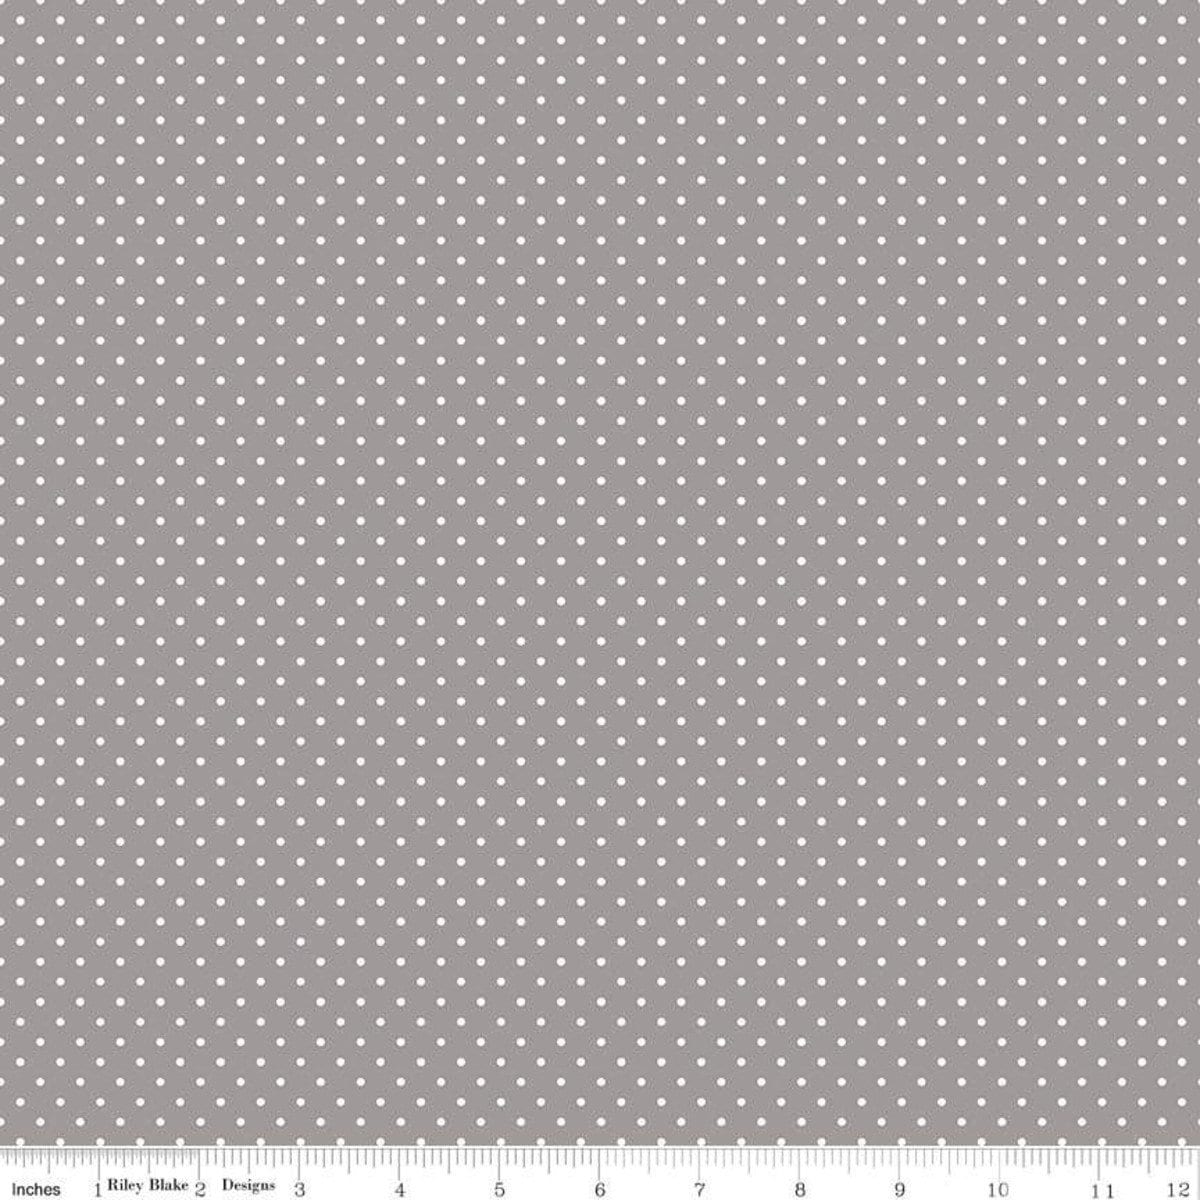 Swiss Dots White on Gray Fabric - Riley Blake Designs C670-40GRAY, White on Gray Dots Fabric, Gray and White Blender Fabric By the Yard